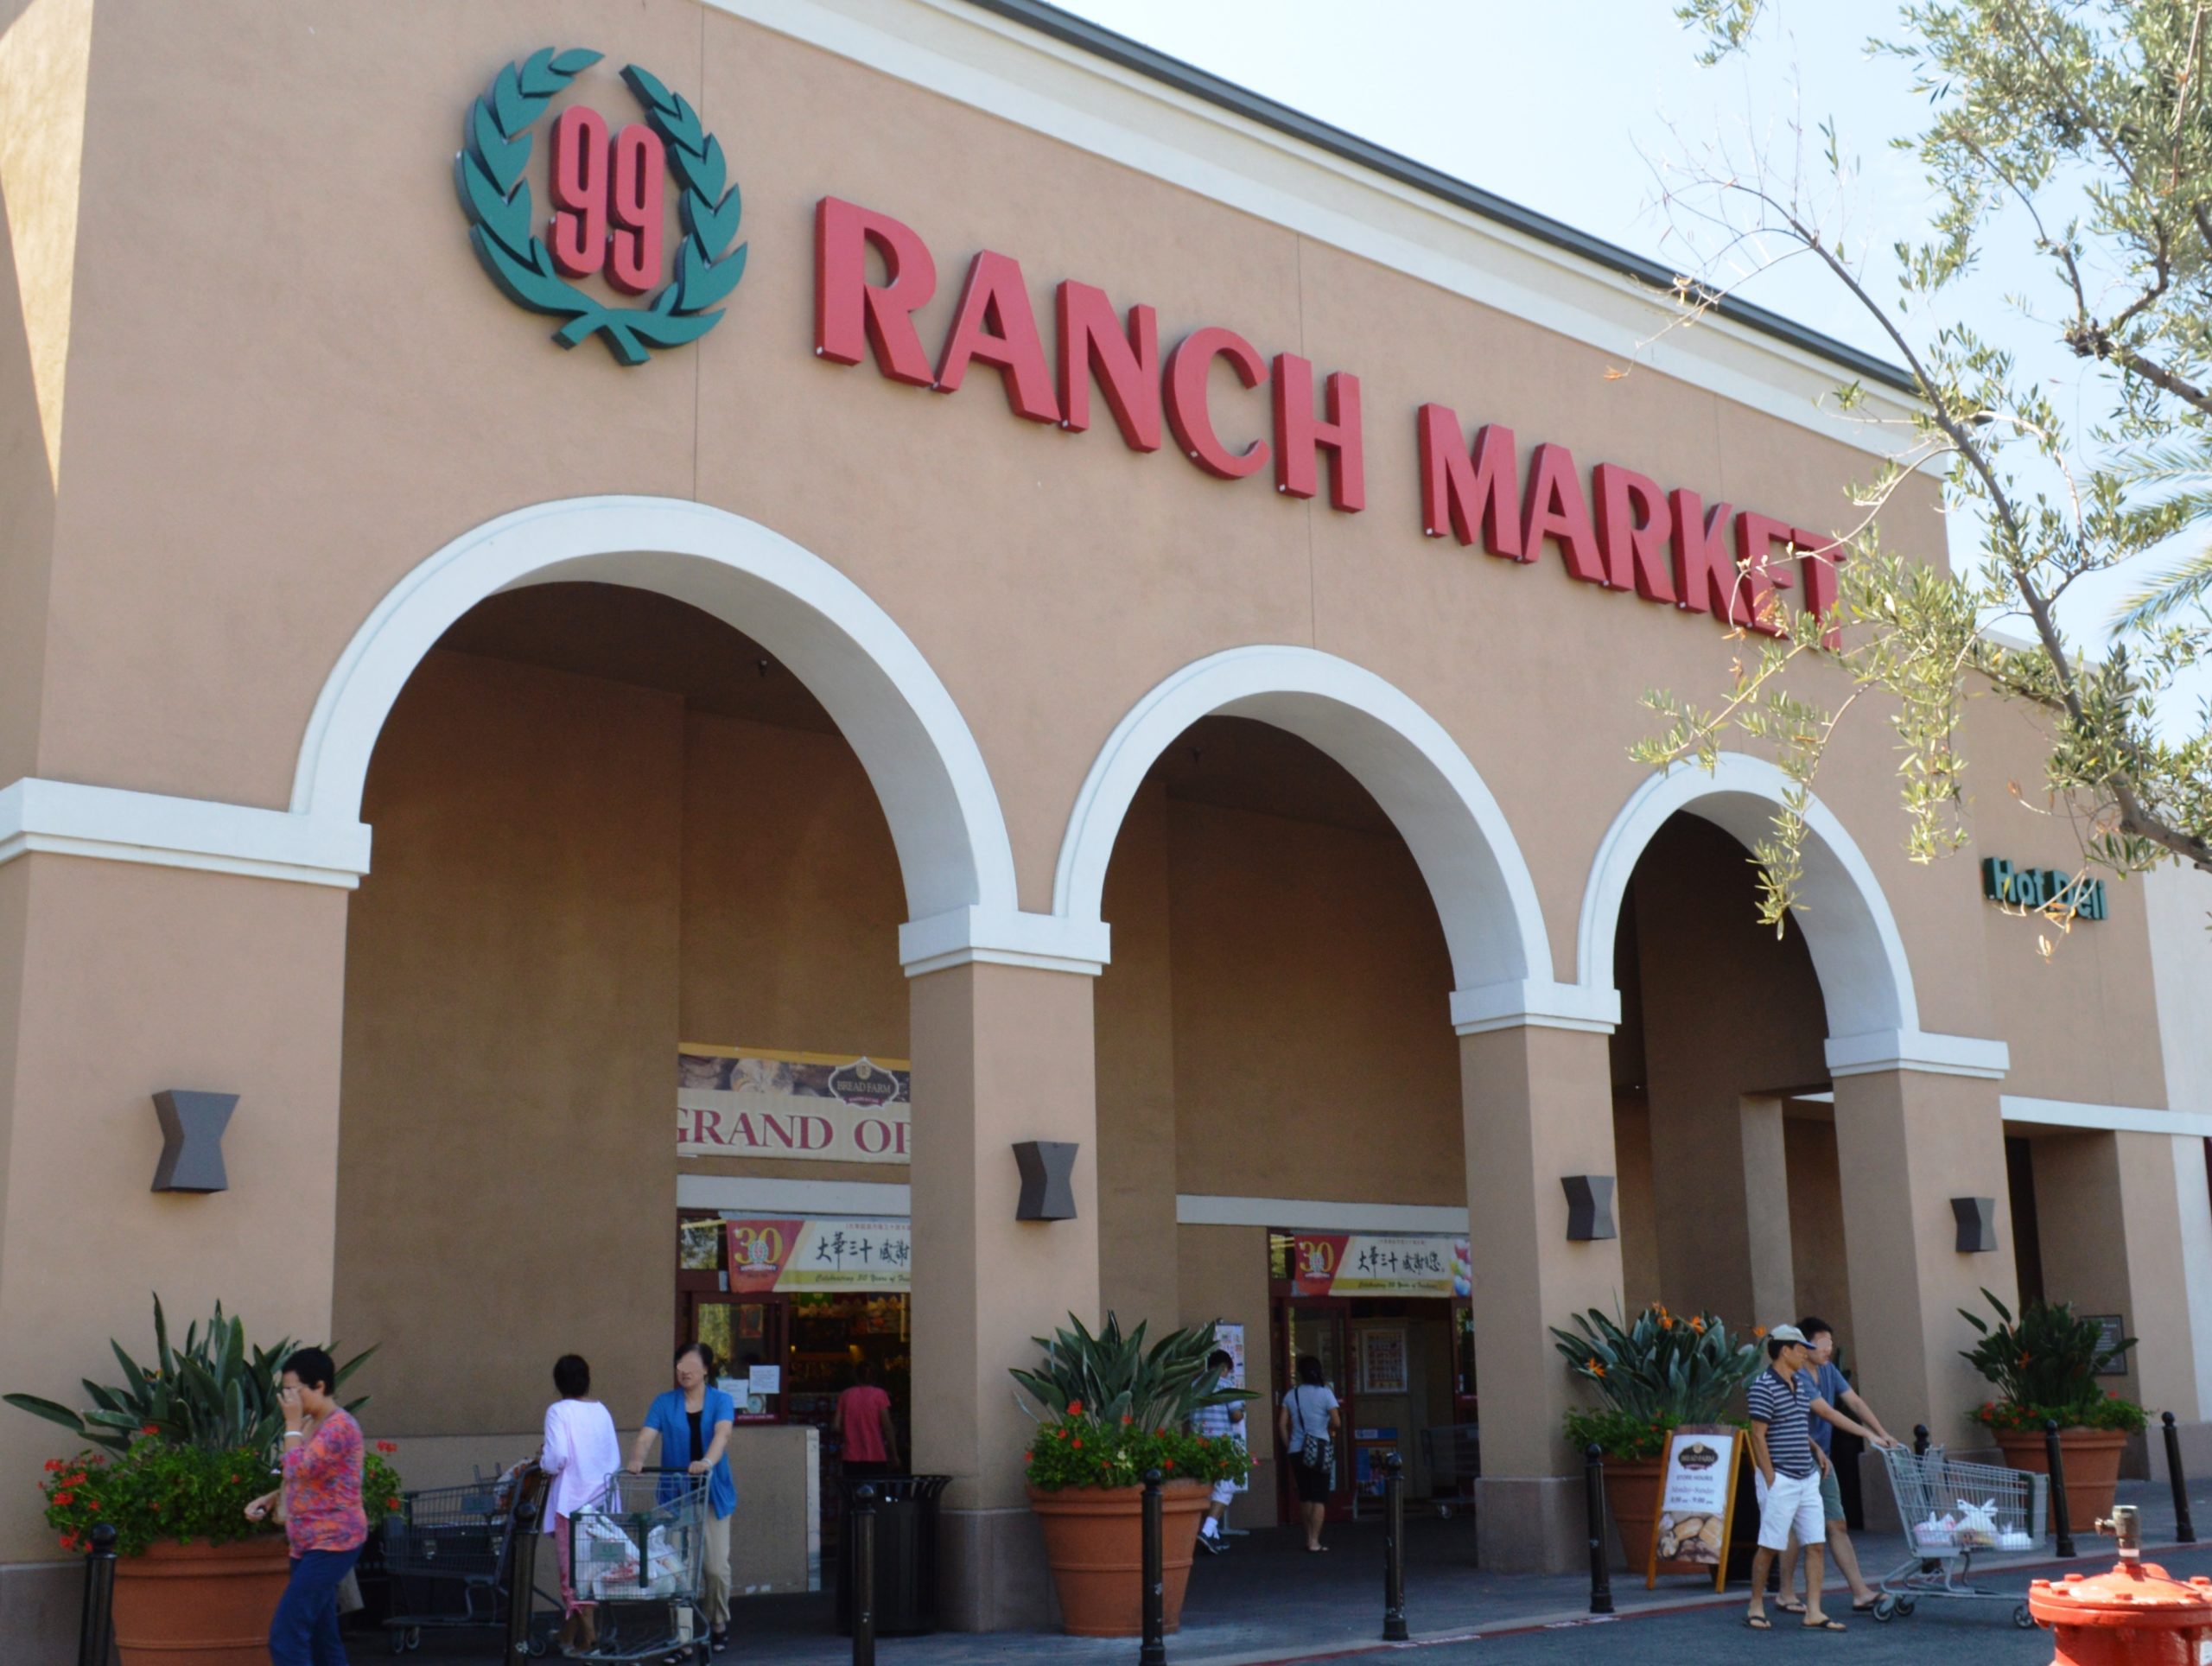 99 Ranch Owner Files Liquor License Application For Westwood